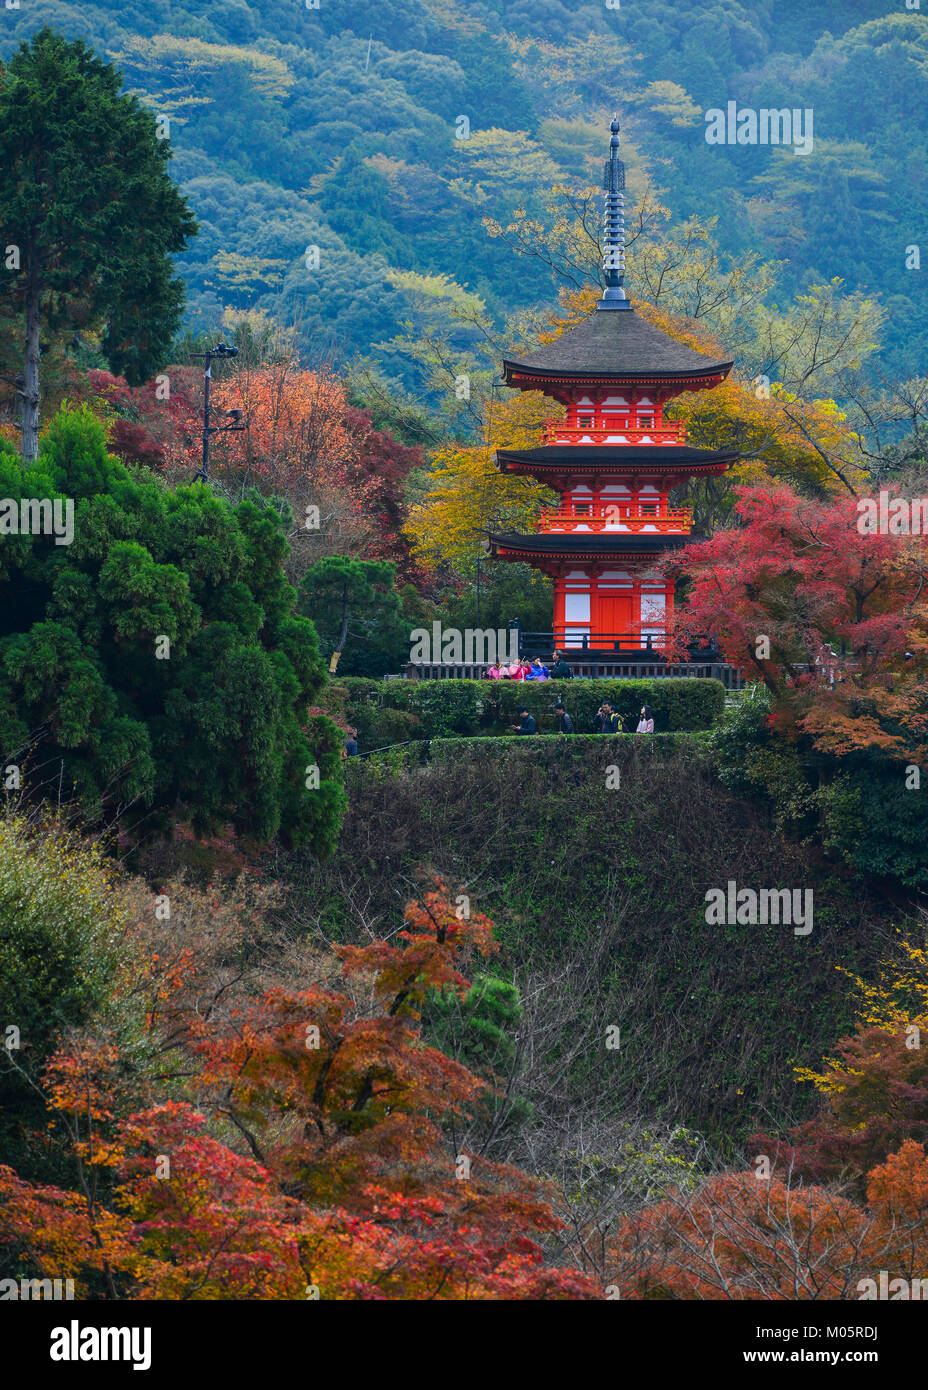 Kyoto, Japan - Nov 29, 2016. Prayers visit Kiyomizu-dera Temple at autumn in Kyoto, Japan. The temple is part of the Historic Monuments of Kyoto UNESC Stock Photo